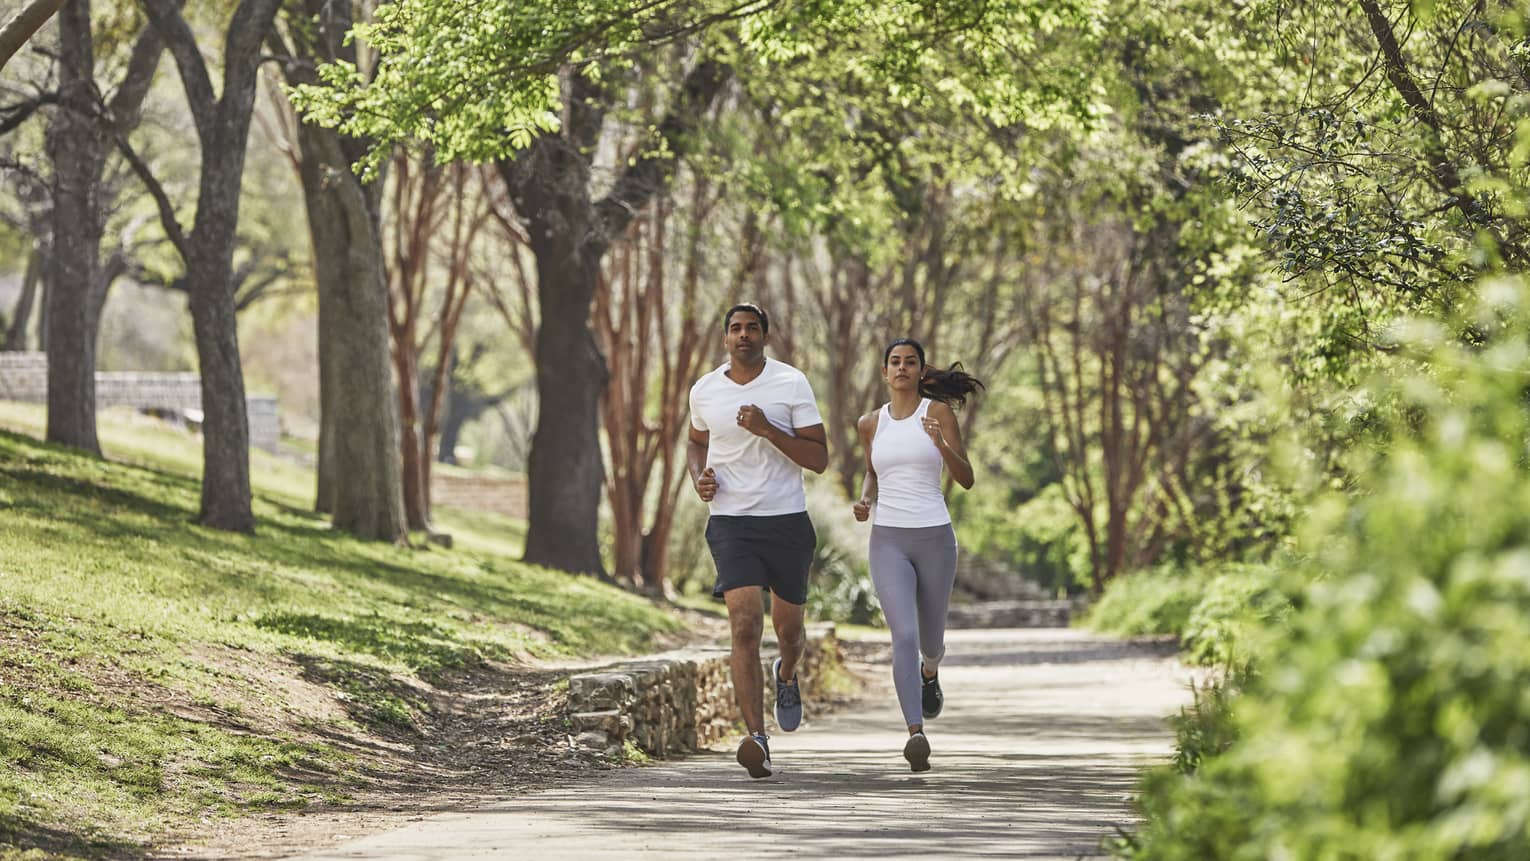 Two guests run together along a tree-lined path